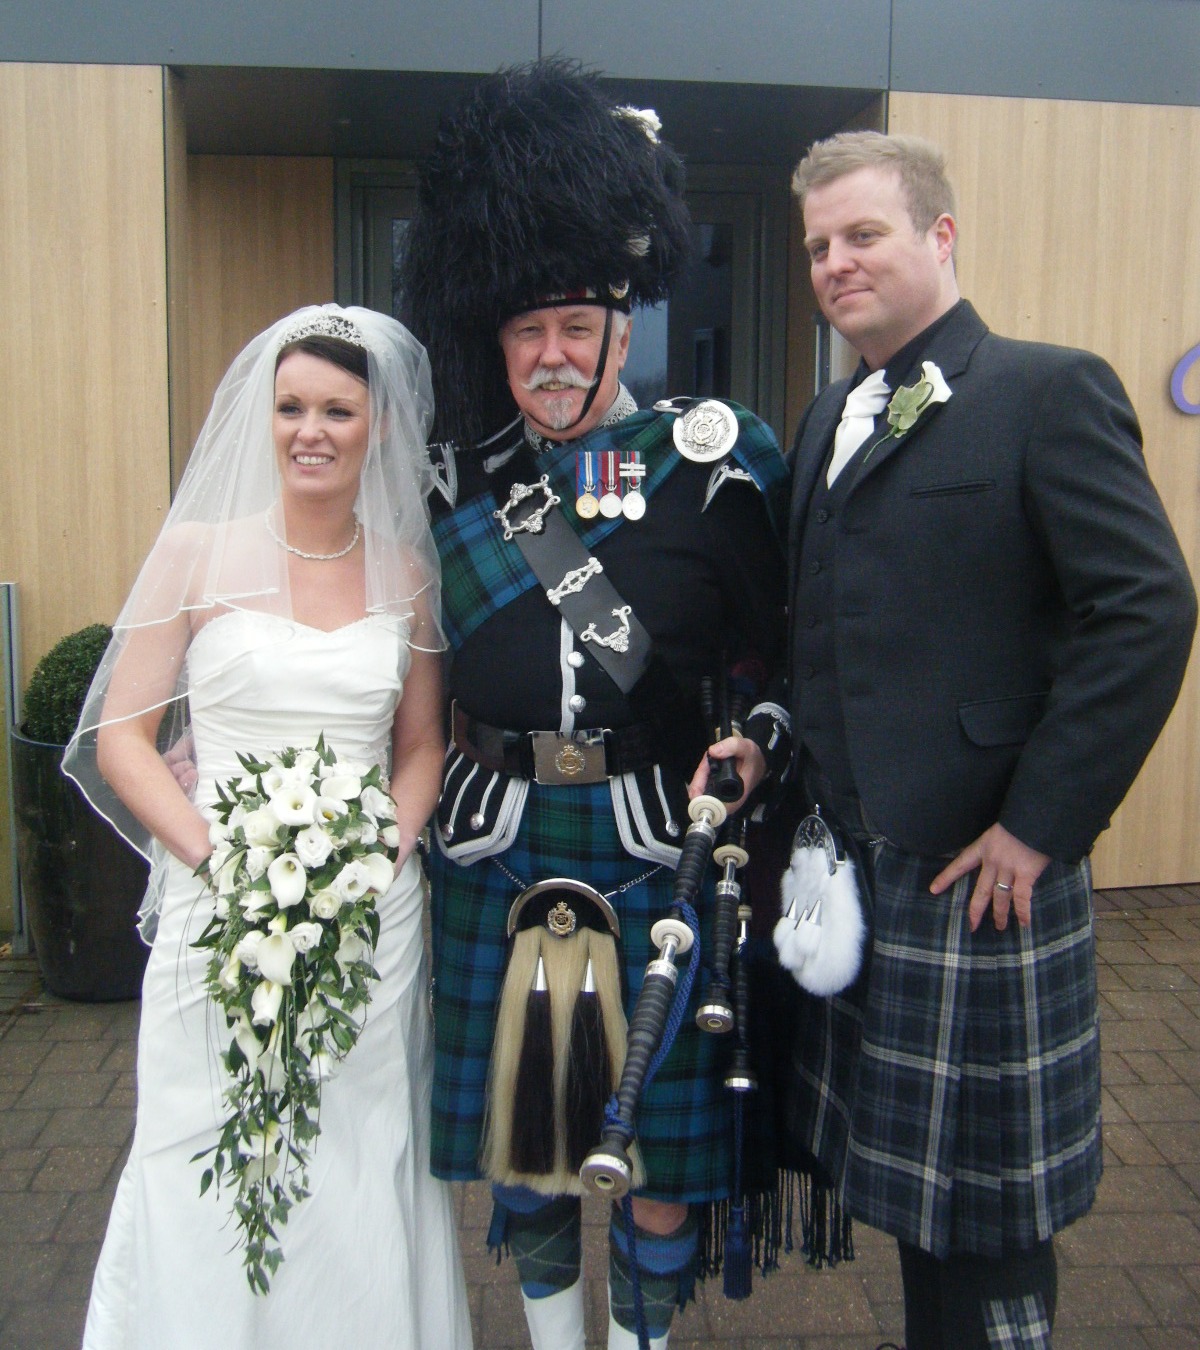 Jim with a selection of Brides and Grooms  at the Vu Bathgate